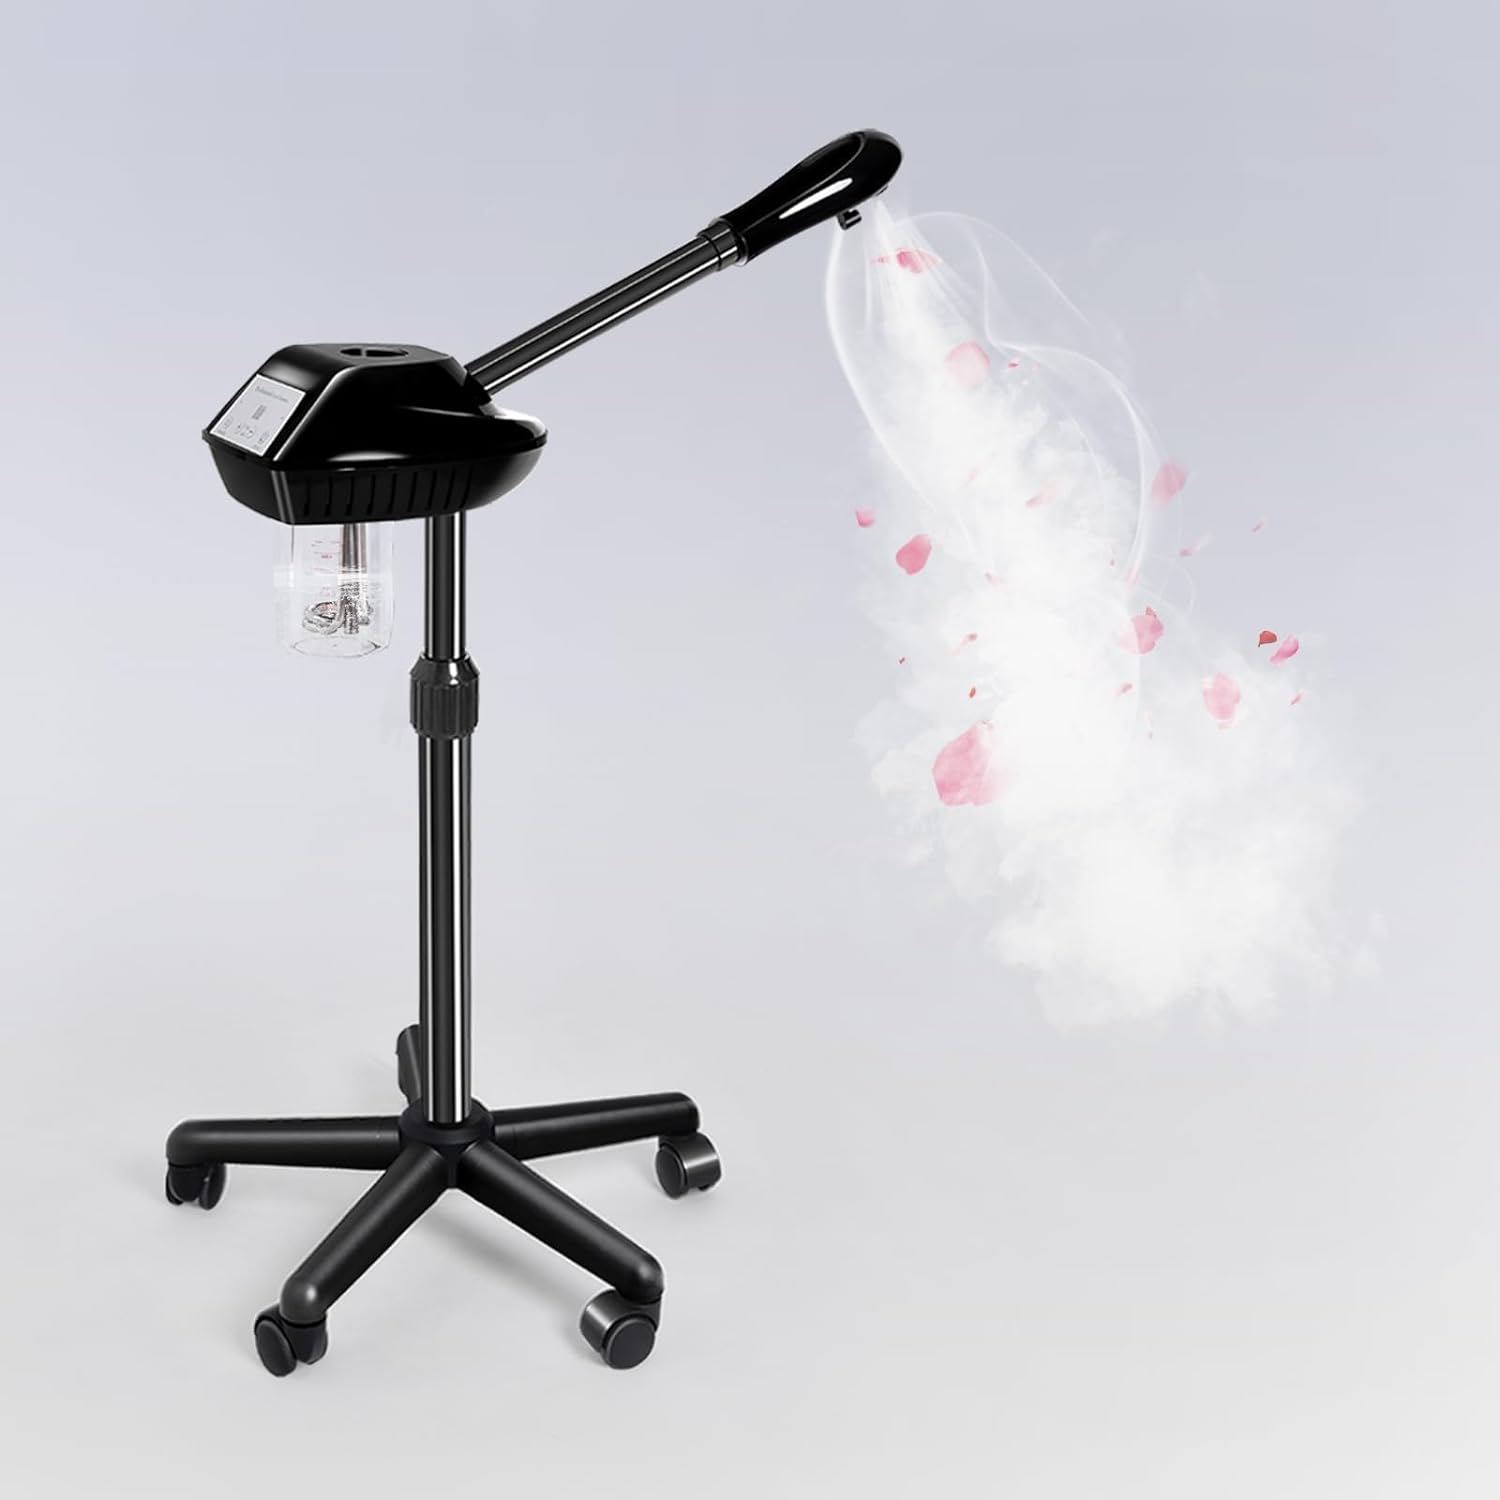 Retain time Professional Facial Steamer, Facial Steamer on on Wheels with More Steam, Adjustable Height for Face Steamer Suitable for Personal and Professional Personal Care Places.